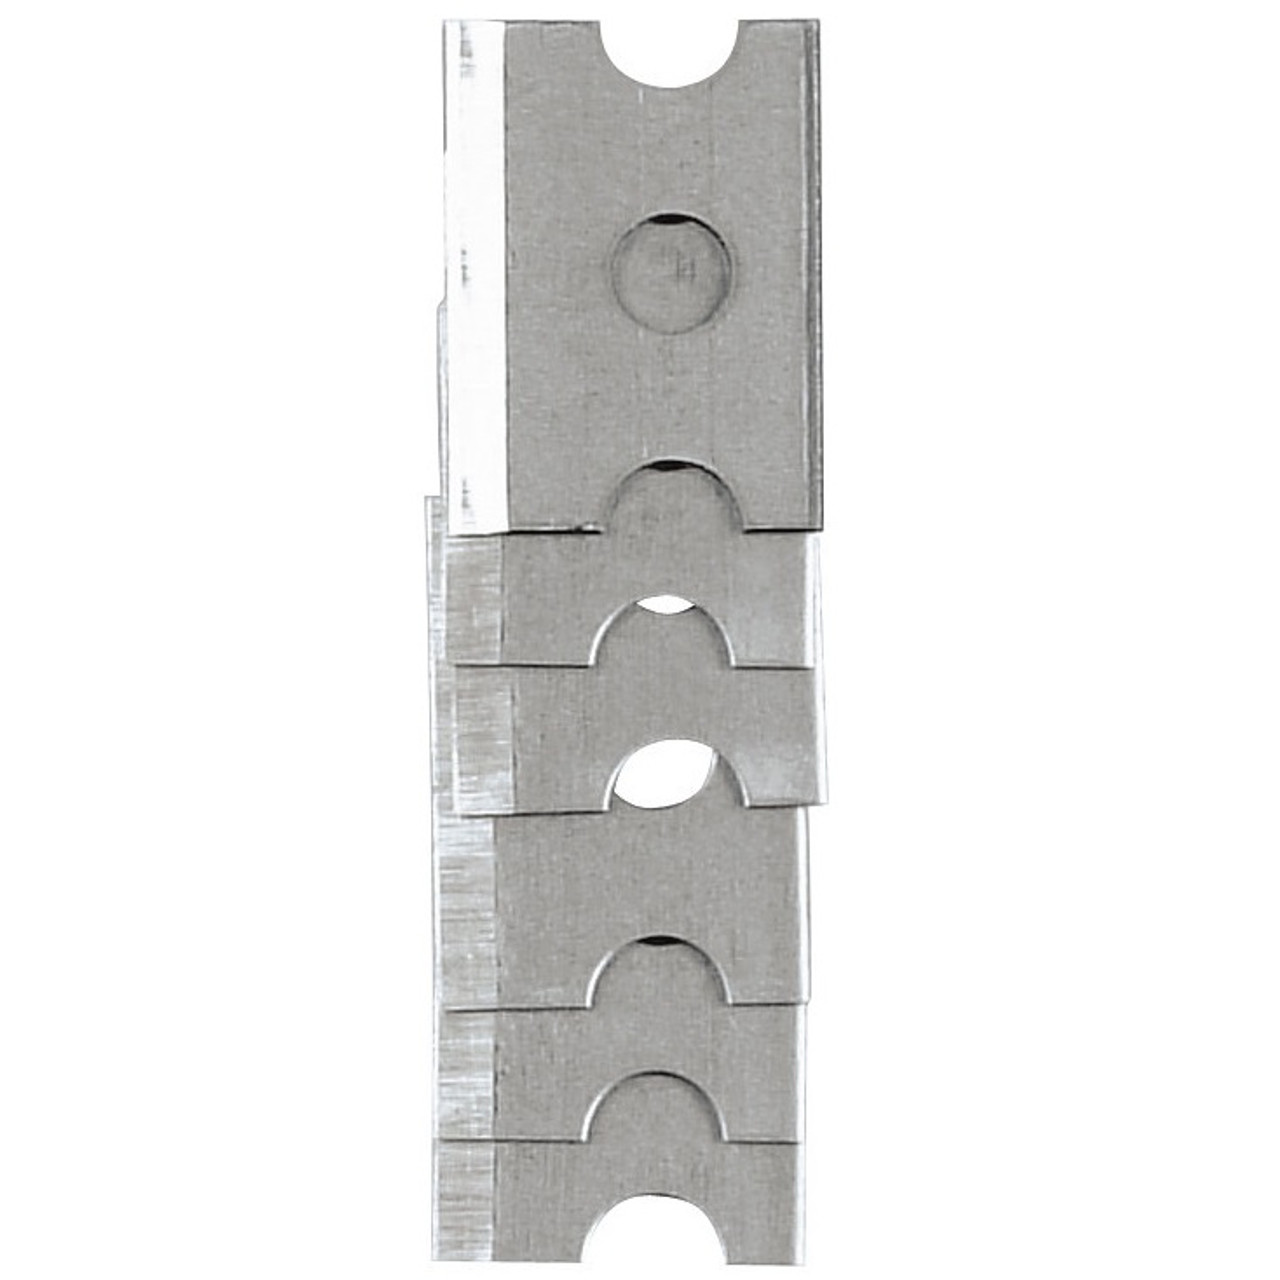 Replacement blade for ECL-200-016